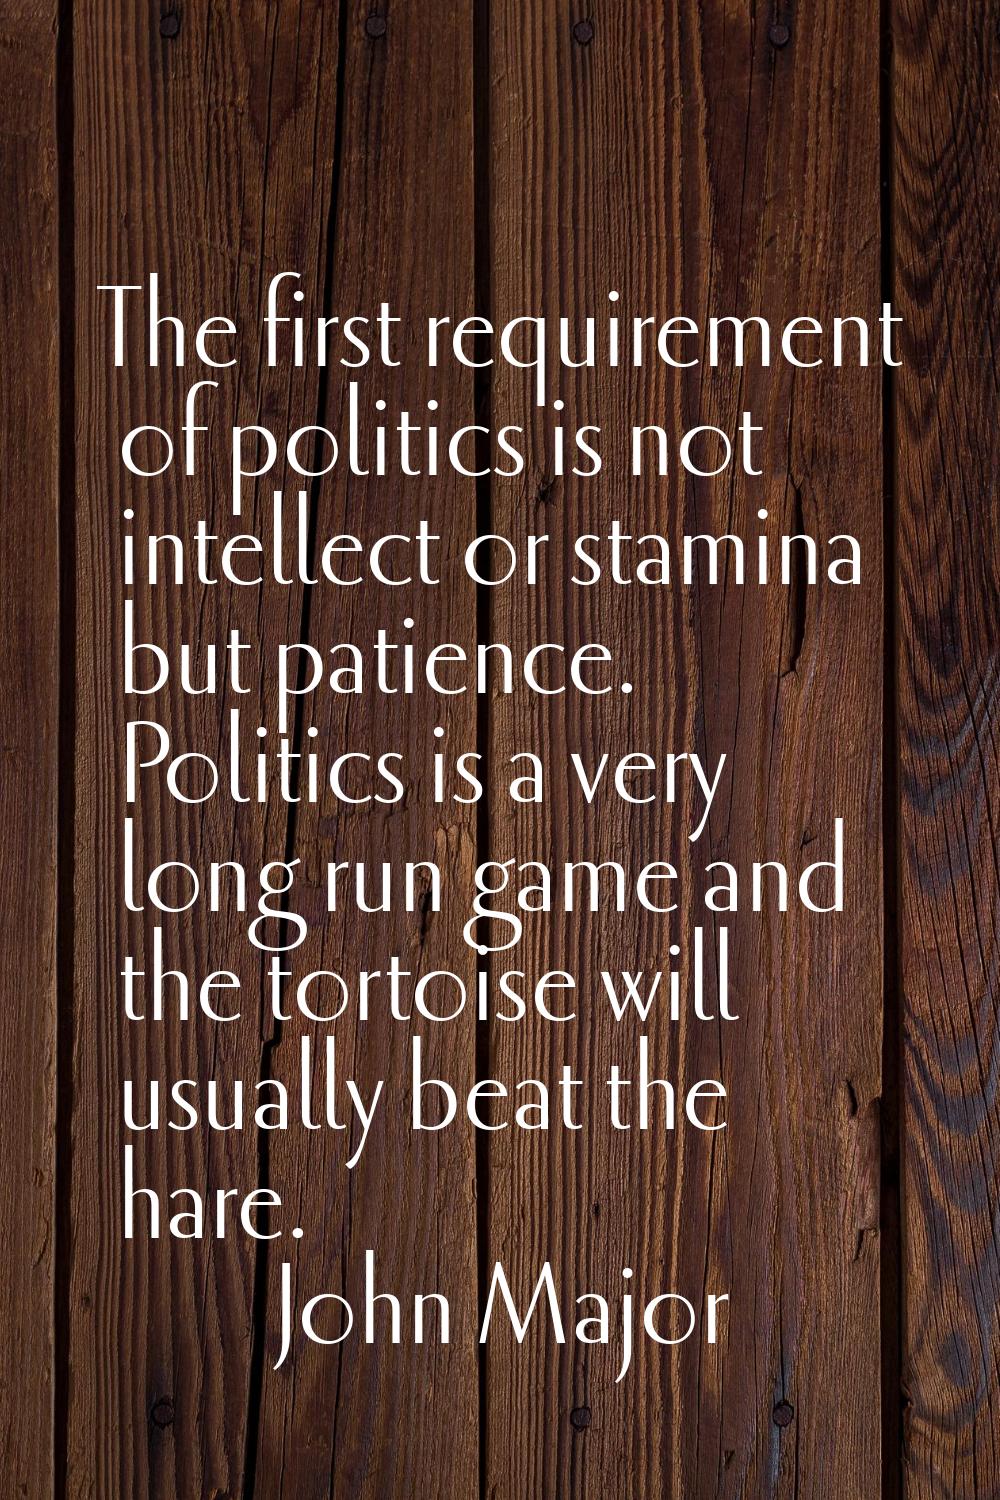 The first requirement of politics is not intellect or stamina but patience. Politics is a very long